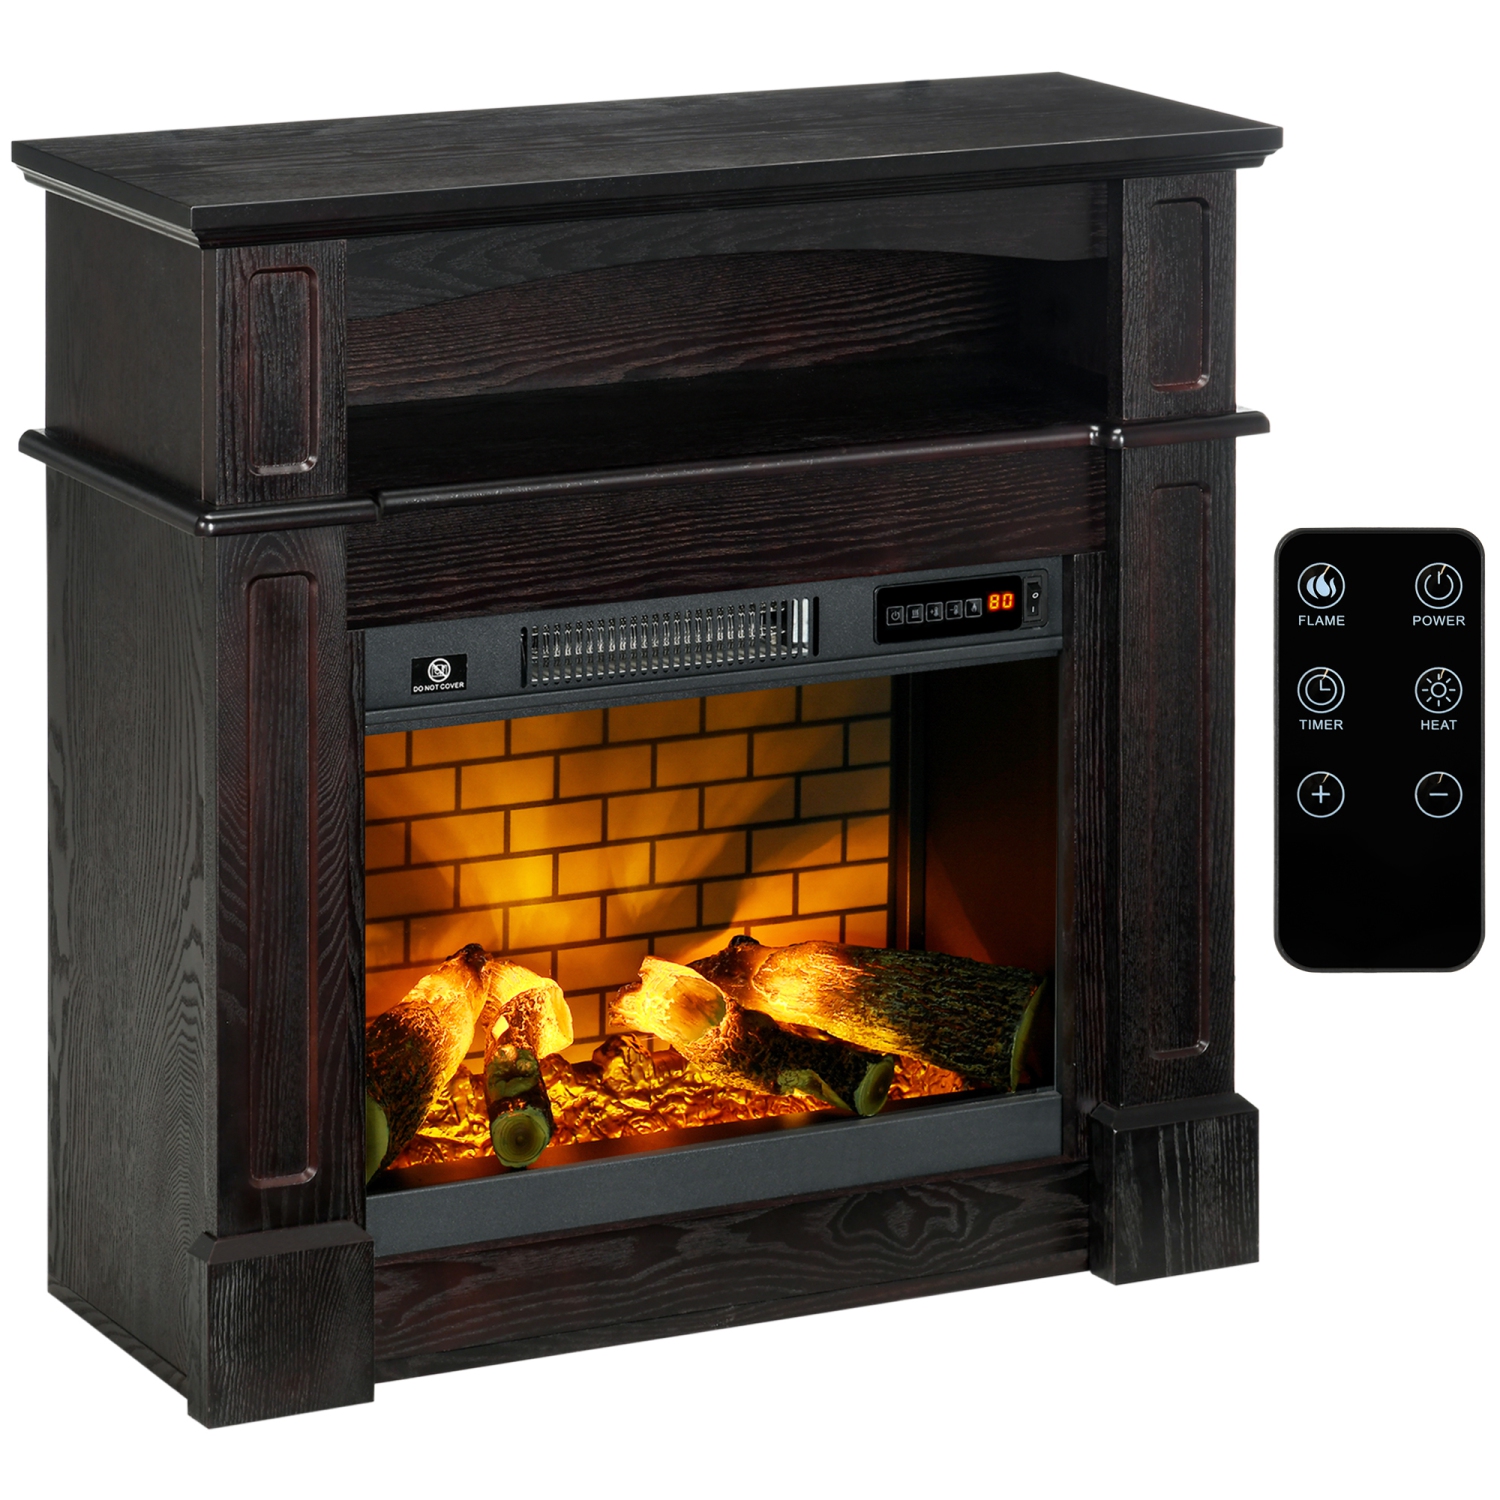 HOMCOM 32" Electric Fireplace Heater with Mantel, Freestanding Fireplace Stove with Log Hearth, Adjustable Realistic Flame and Remote Control, 700W/1400W, Brown